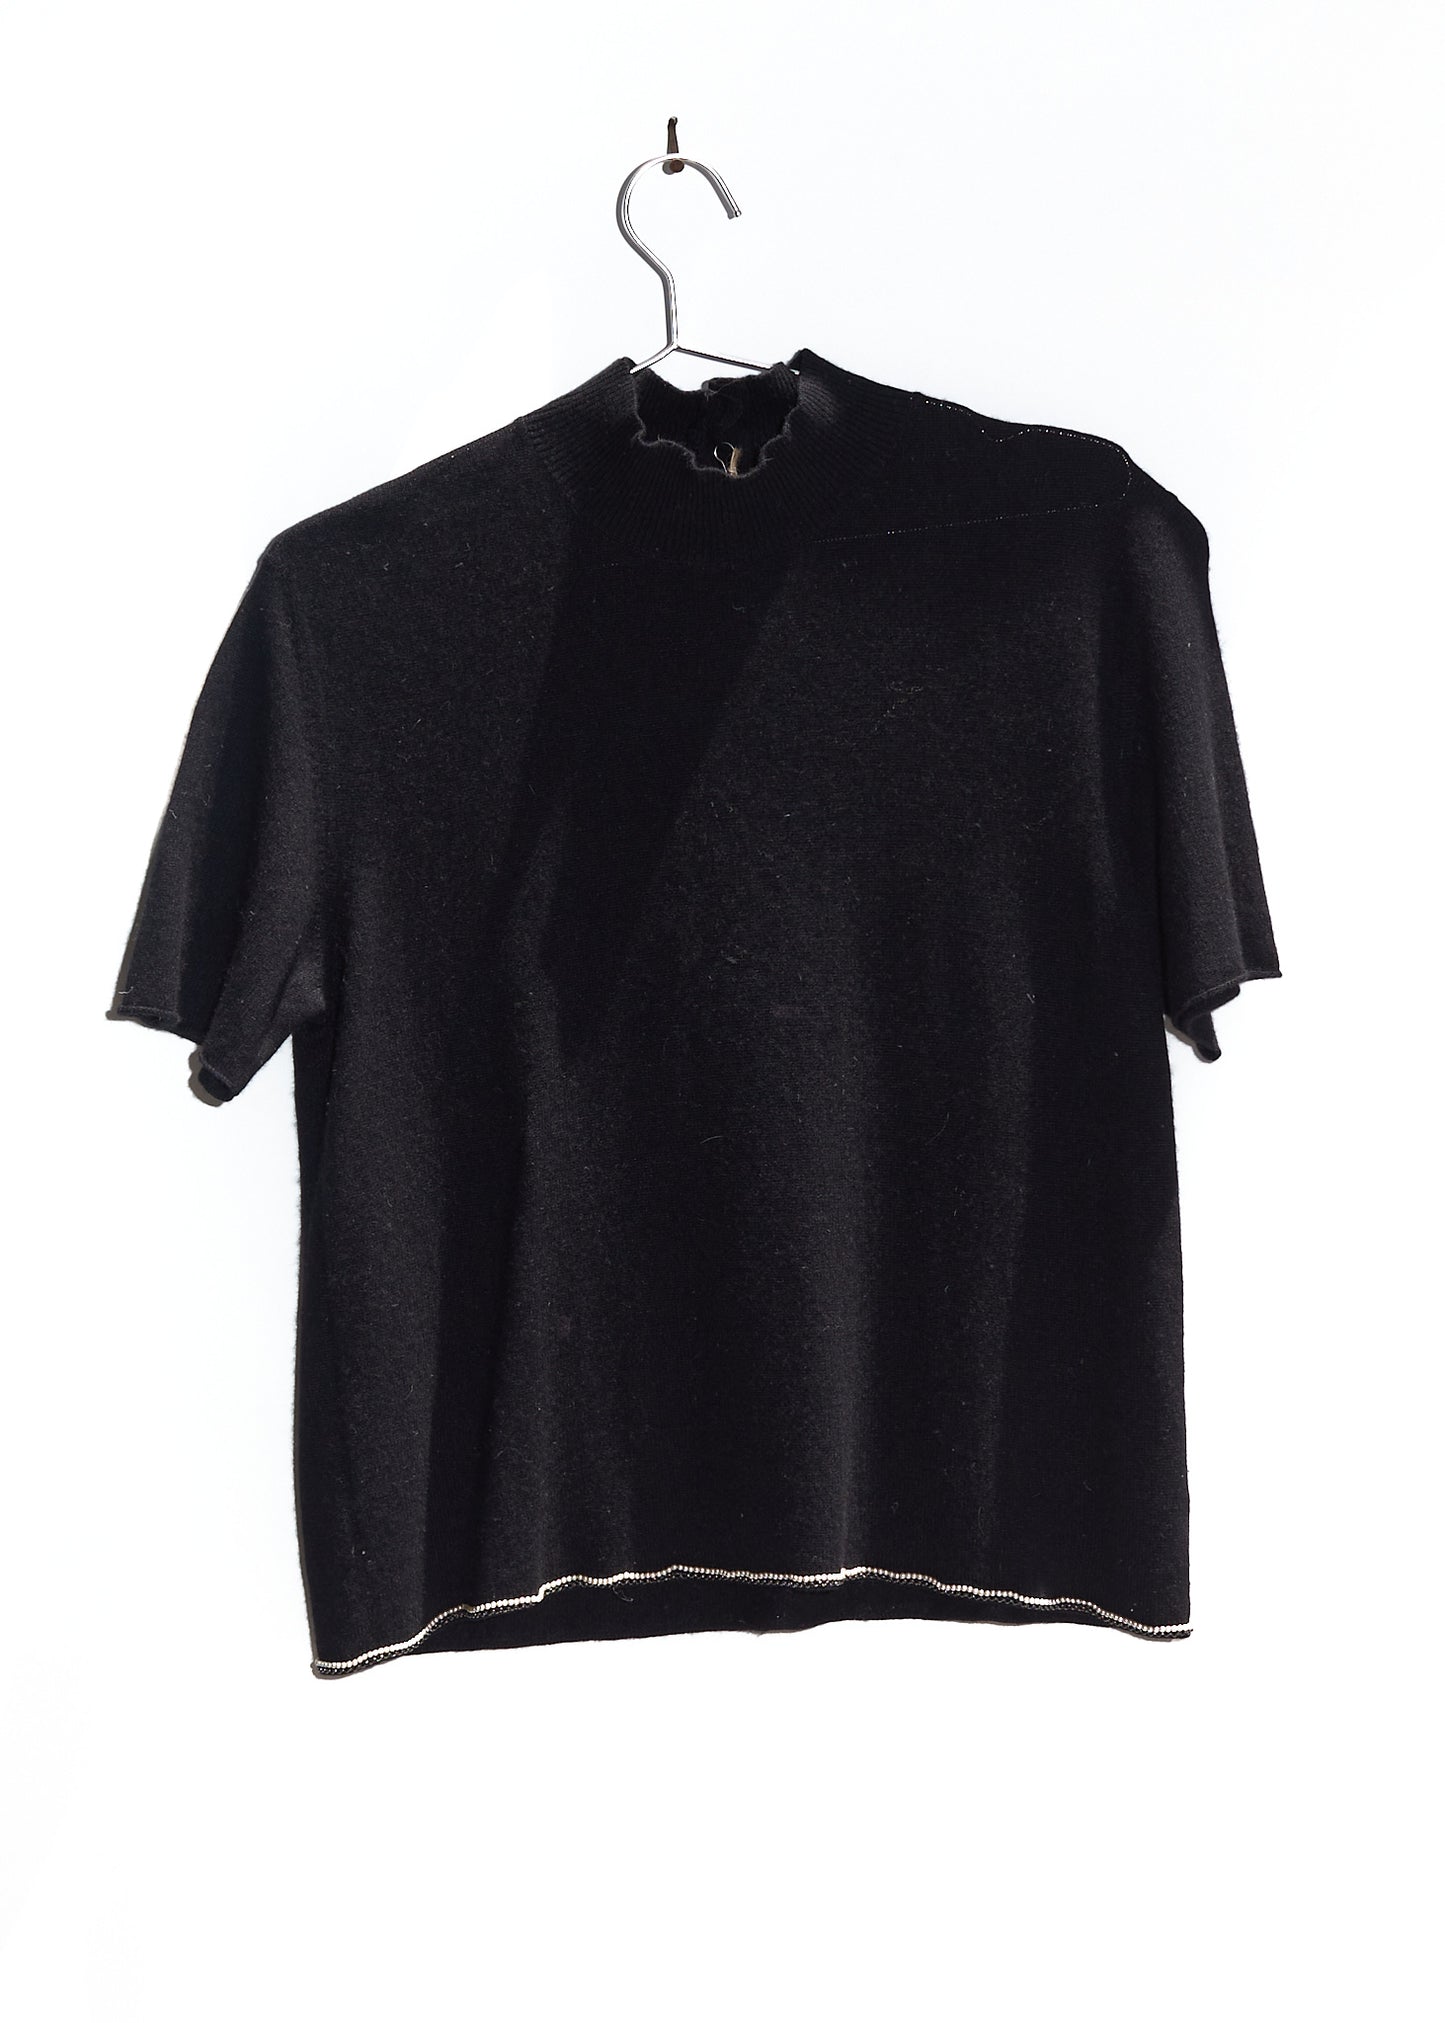 Chanel Cashmere Short Sleeve Sweater